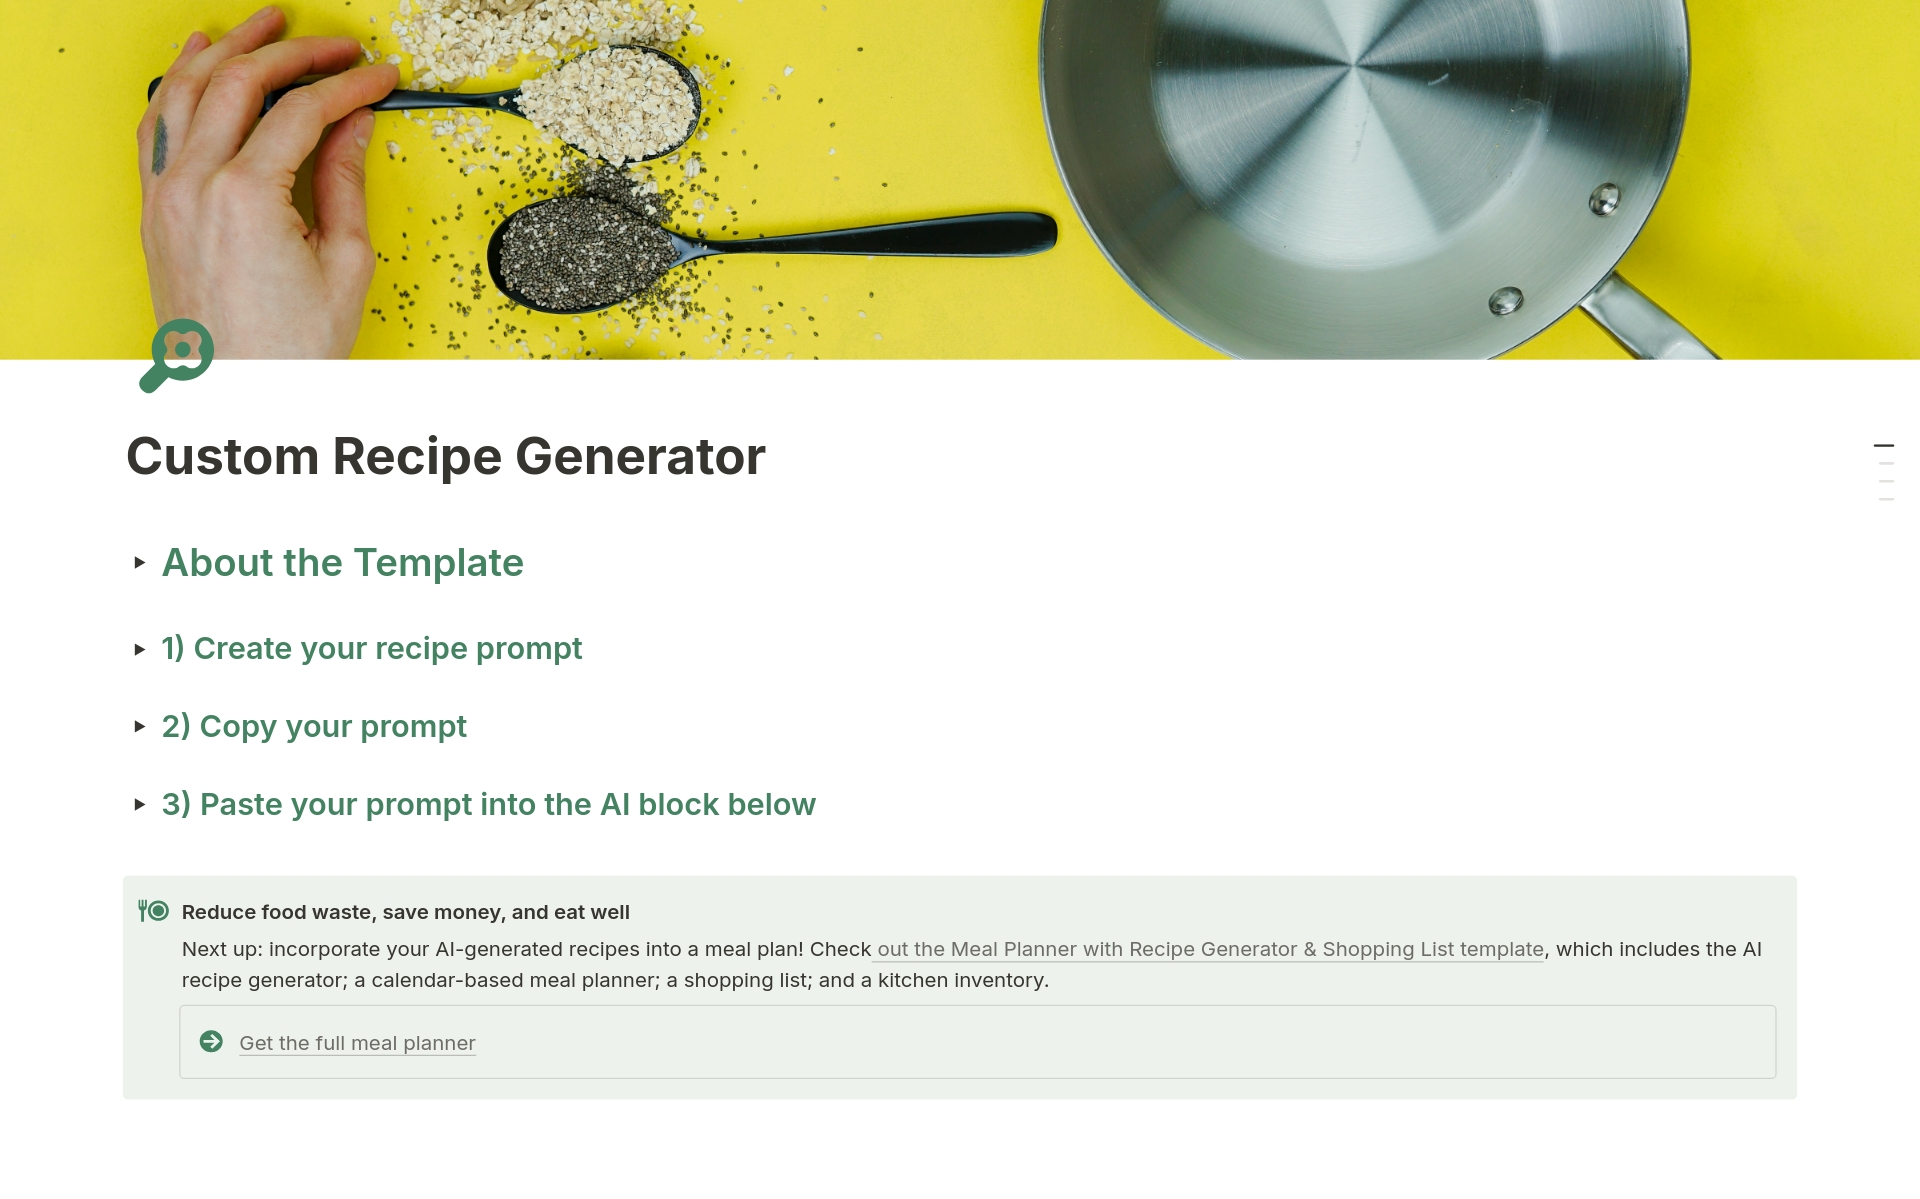 What can you make with the ingredients in your kitchen? Use the Custom Recipe Generator Notion Template to help build the perfect recipe for you!